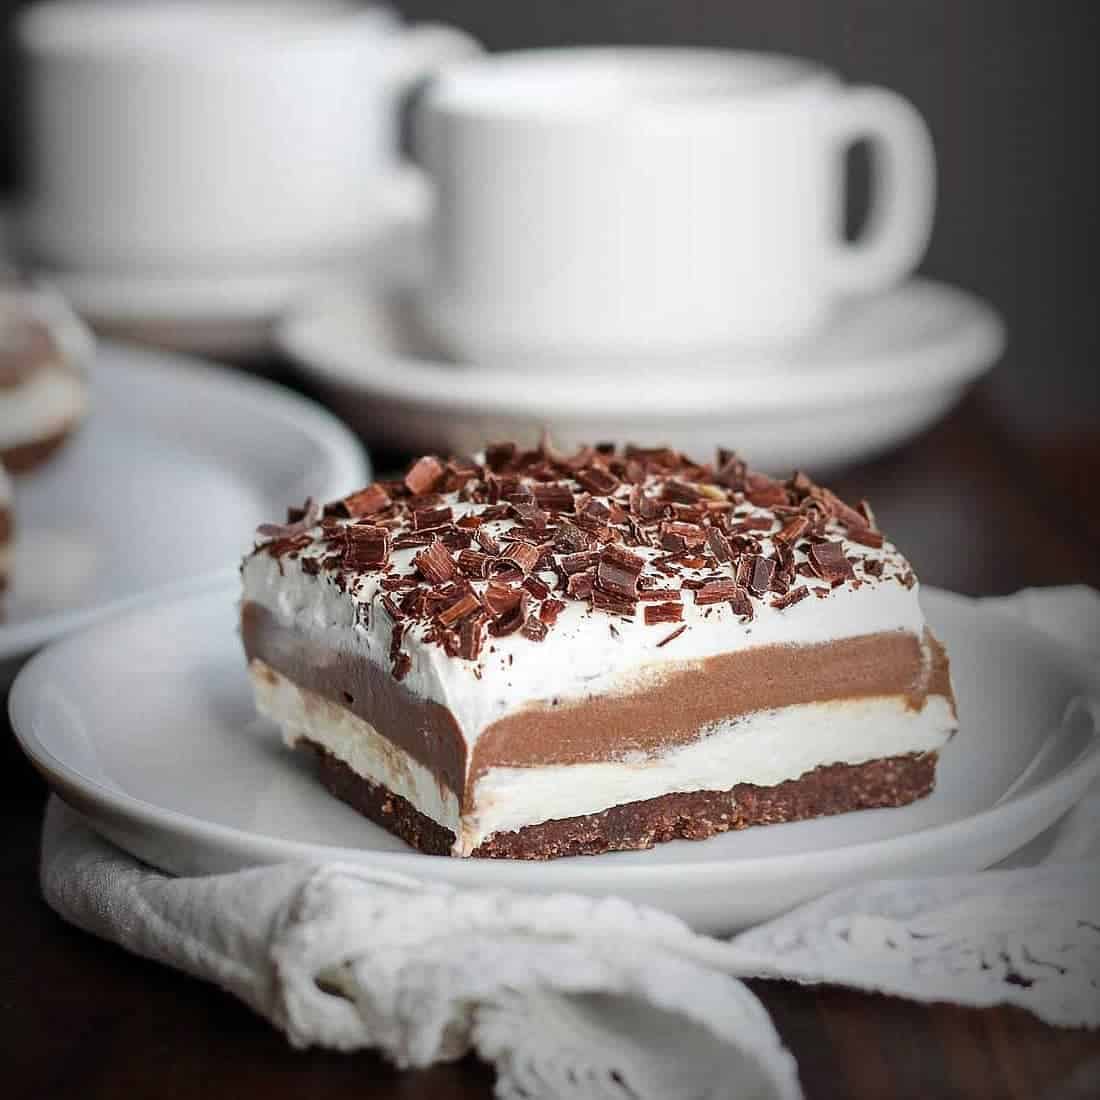 Easy no bake low carb desserts